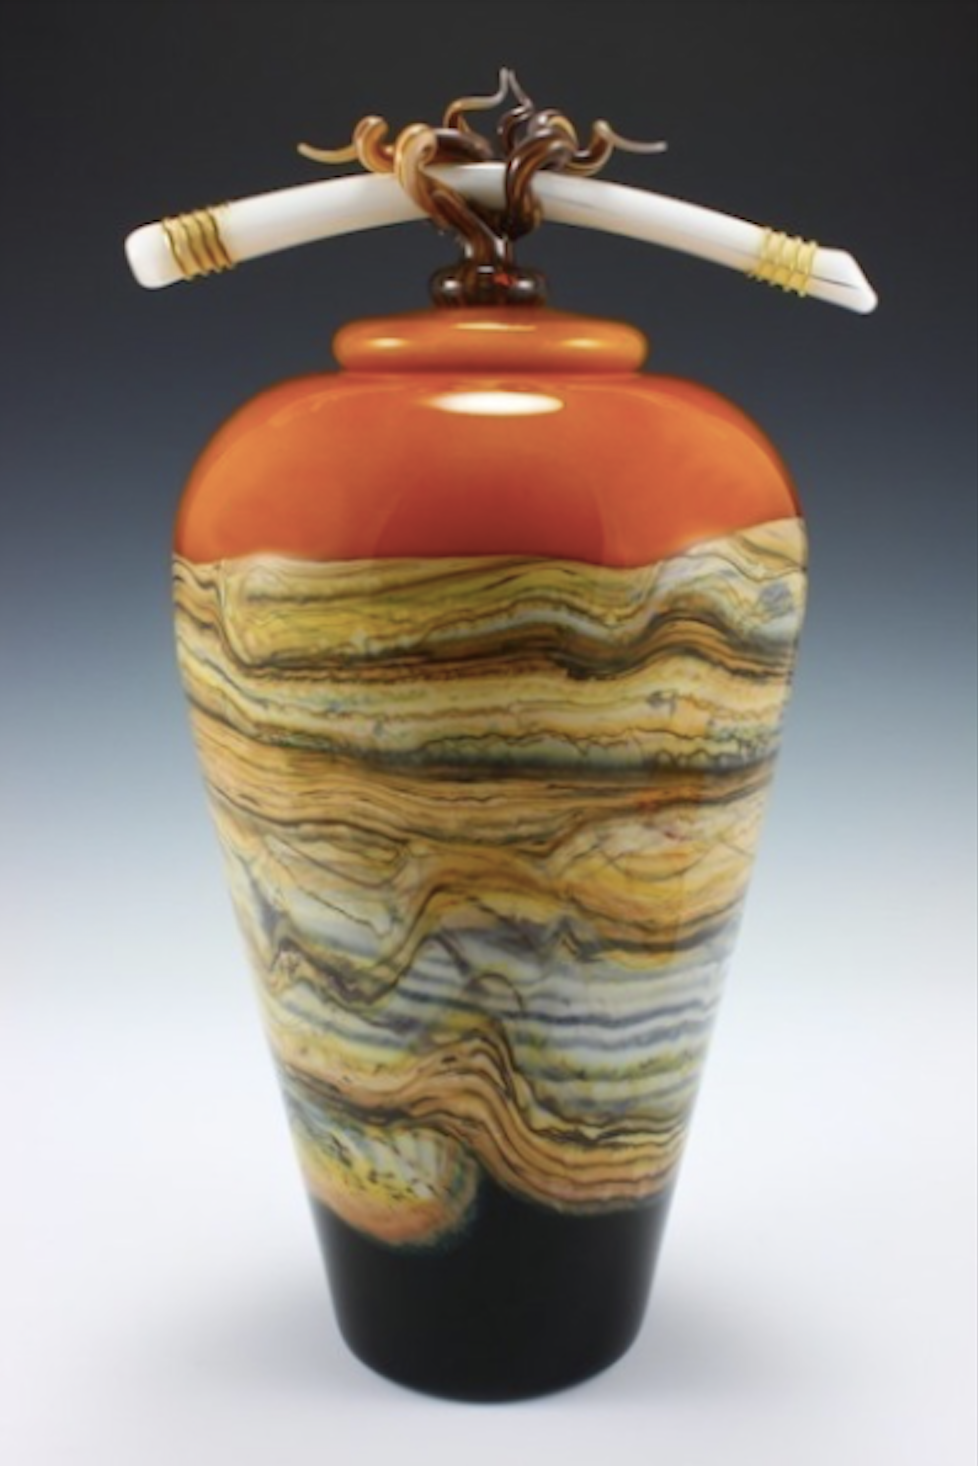 Strata Small Covered Jar in Tangerine Glass with Bone and Tendril Finial